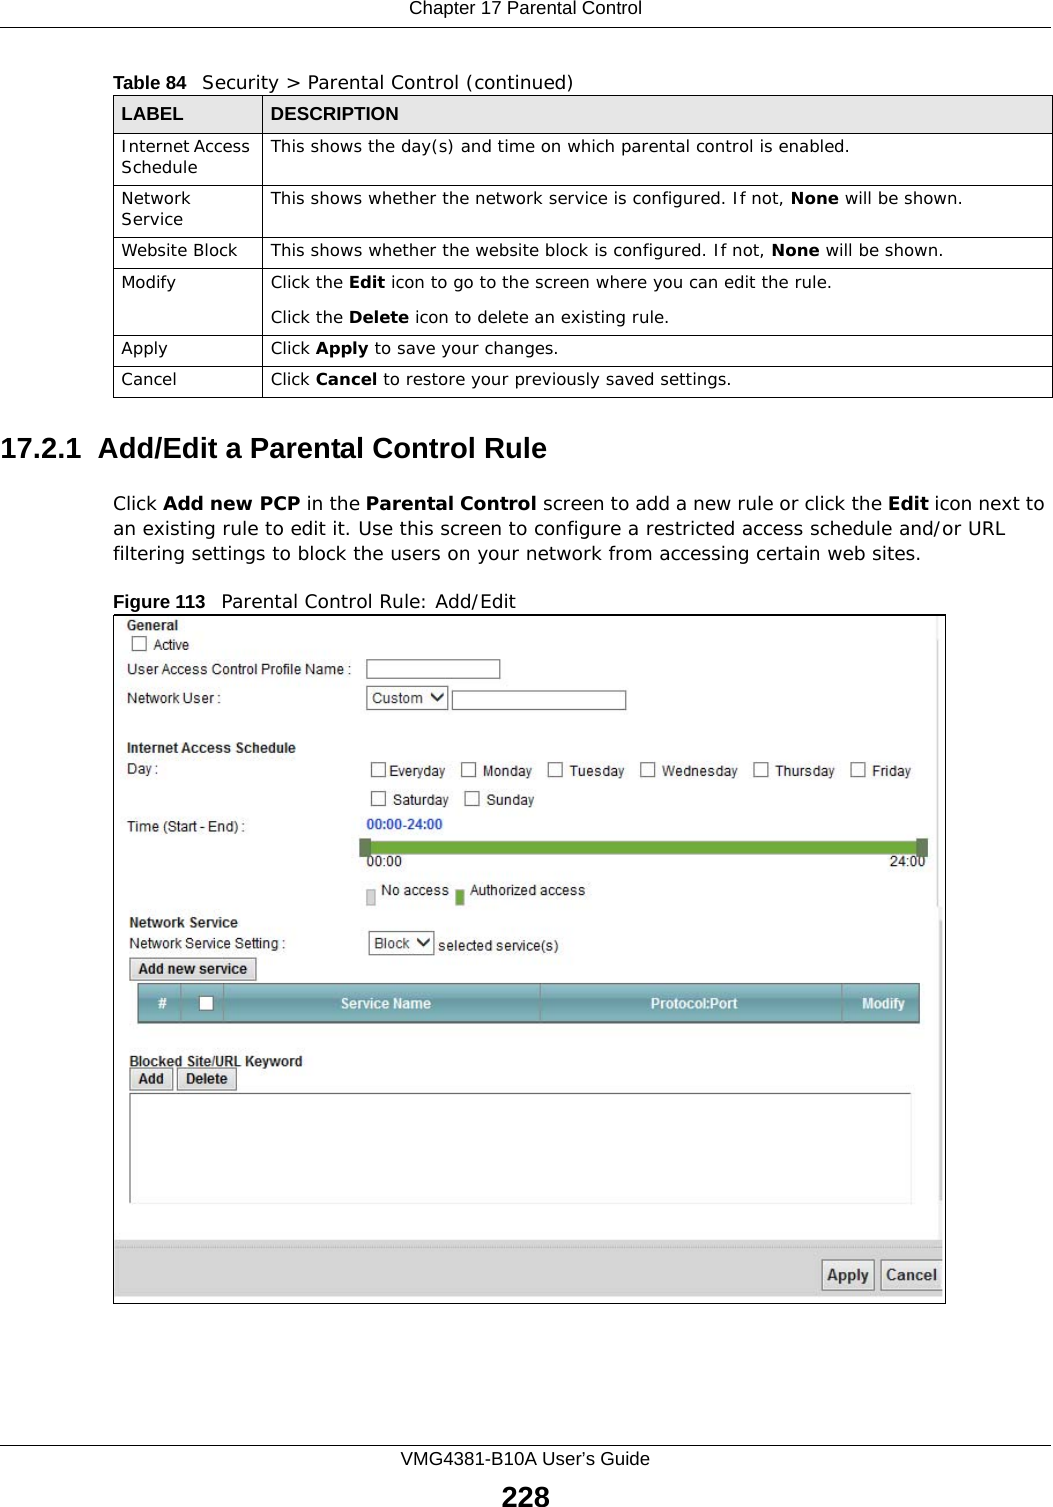 Chapter 17 Parental ControlVMG4381-B10A User’s Guide22817.2.1  Add/Edit a Parental Control RuleClick Add new PCP in the Parental Control screen to add a new rule or click the Edit icon next to an existing rule to edit it. Use this screen to configure a restricted access schedule and/or URL filtering settings to block the users on your network from accessing certain web sites.Figure 113   Parental Control Rule: Add/Edit Internet Access Schedule This shows the day(s) and time on which parental control is enabled.Network Service This shows whether the network service is configured. If not, None will be shown.Website Block This shows whether the website block is configured. If not, None will be shown.Modify Click the Edit icon to go to the screen where you can edit the rule.Click the Delete icon to delete an existing rule.Apply Click Apply to save your changes.Cancel Click Cancel to restore your previously saved settings.Table 84   Security &gt; Parental Control (continued)LABEL DESCRIPTION